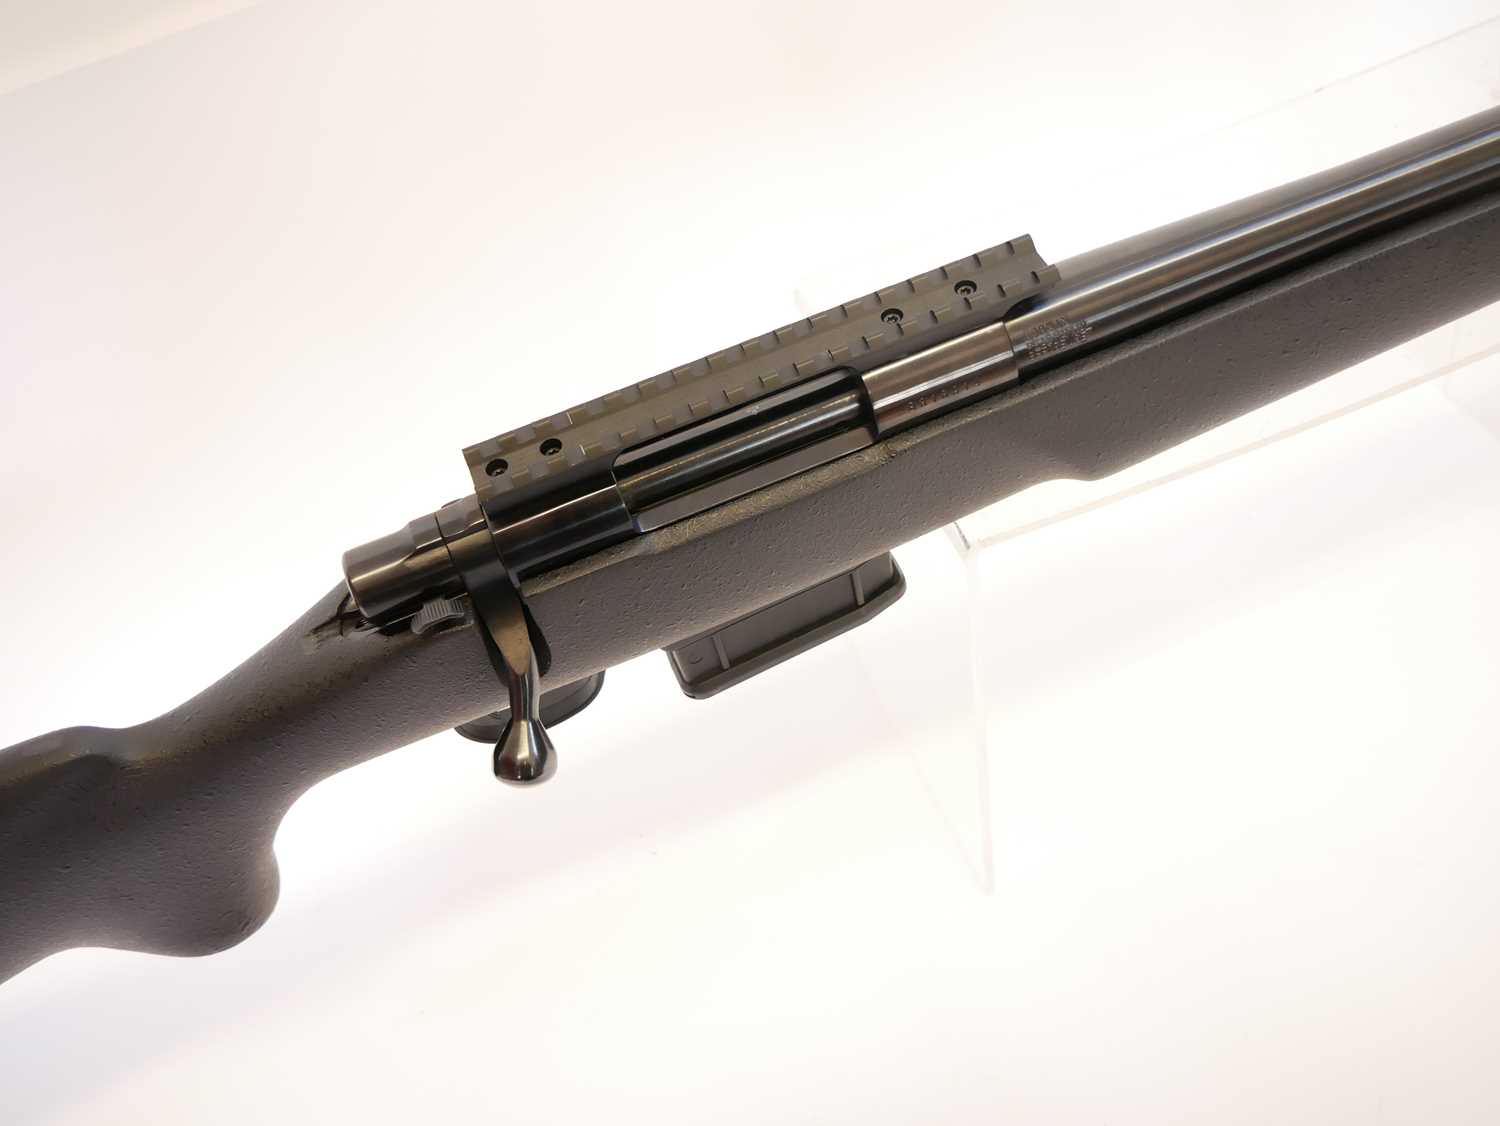 Howa .308 bolt action rifle and moderator, serial number B316914, model 1500 with 20 inch barrel, - Image 5 of 13